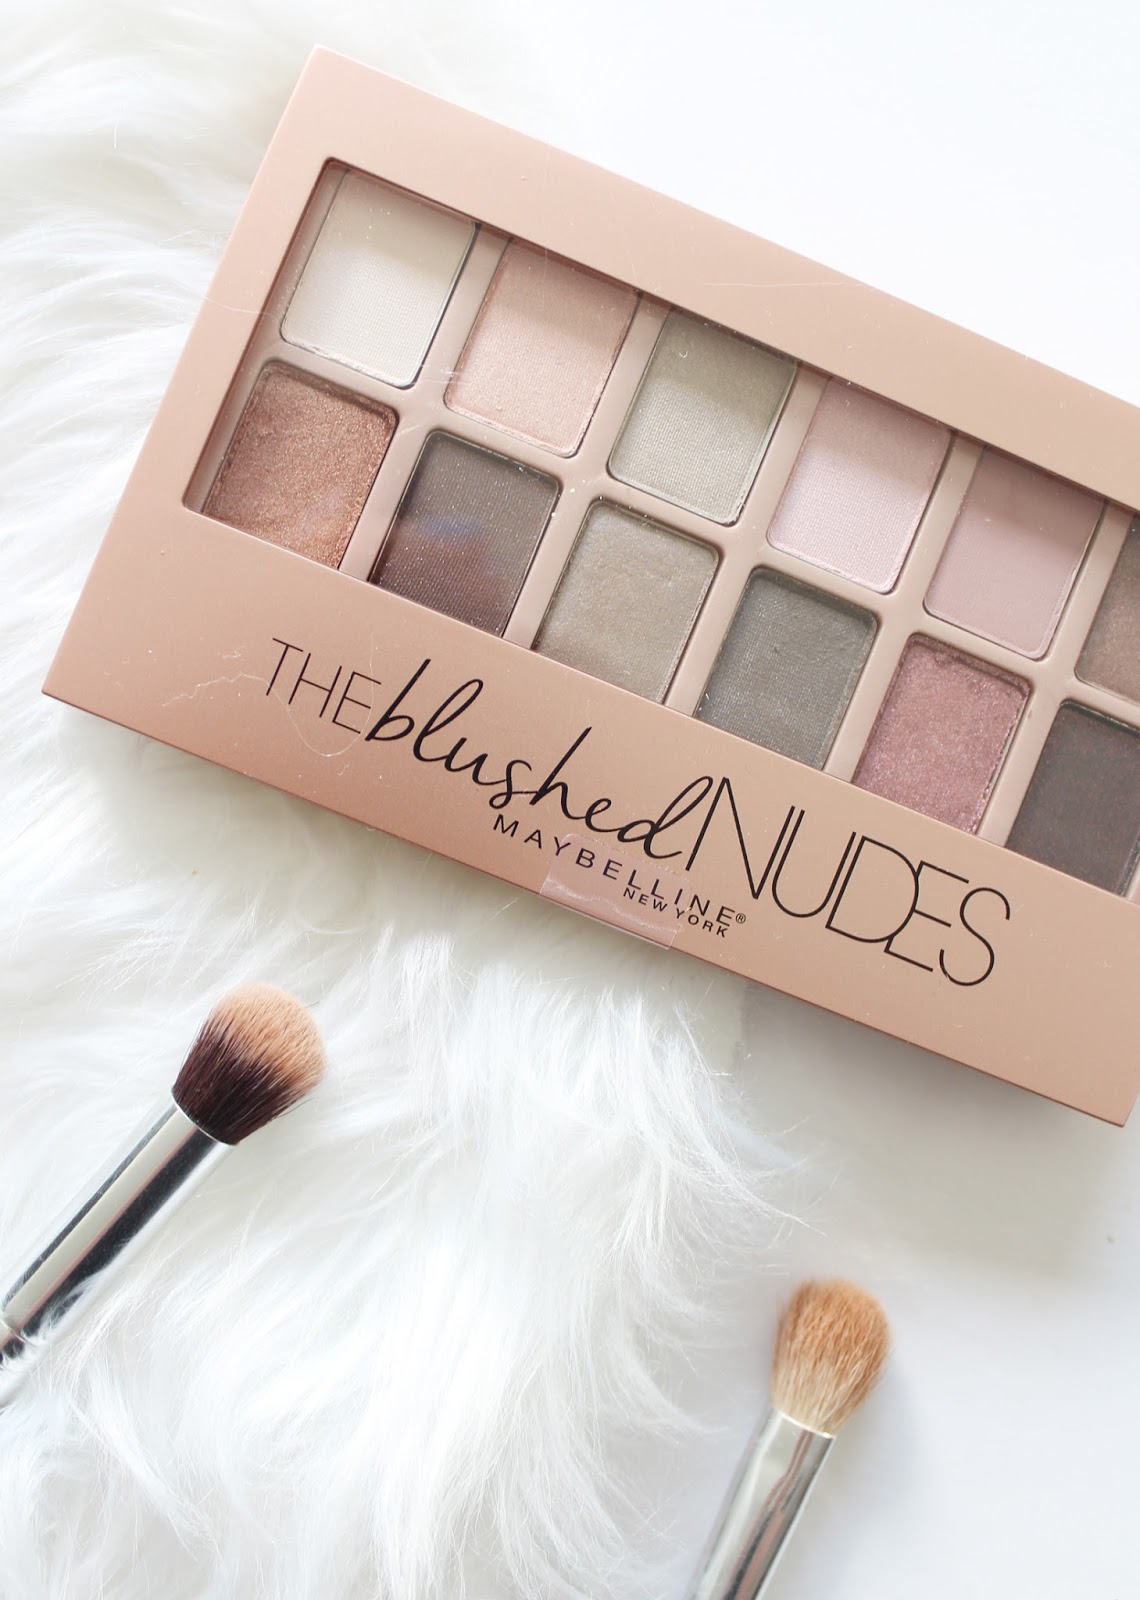 MAYBELLINE | The Blushed Nudes Eyeshadow Palette - Review + Swatches - CassandraMyee